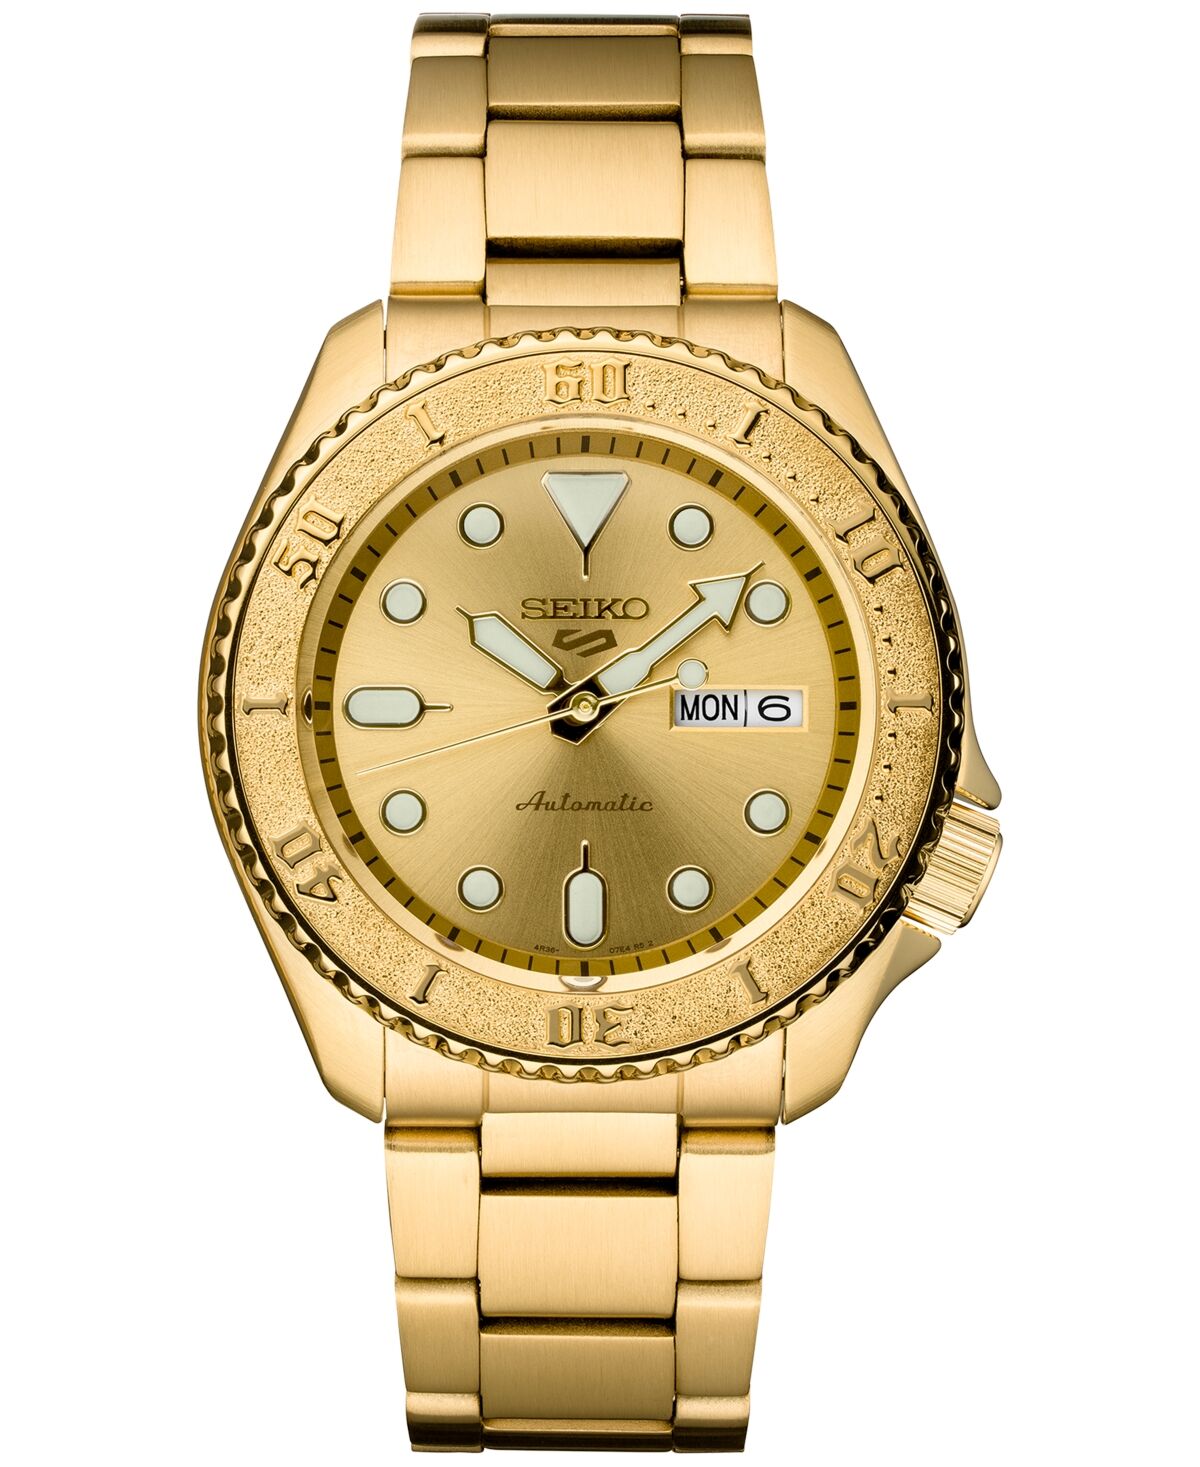 Seiko Men's Automatic 5 Sports Gold-Tone Stainless Steel Bracelet Watch 43mm - Gold